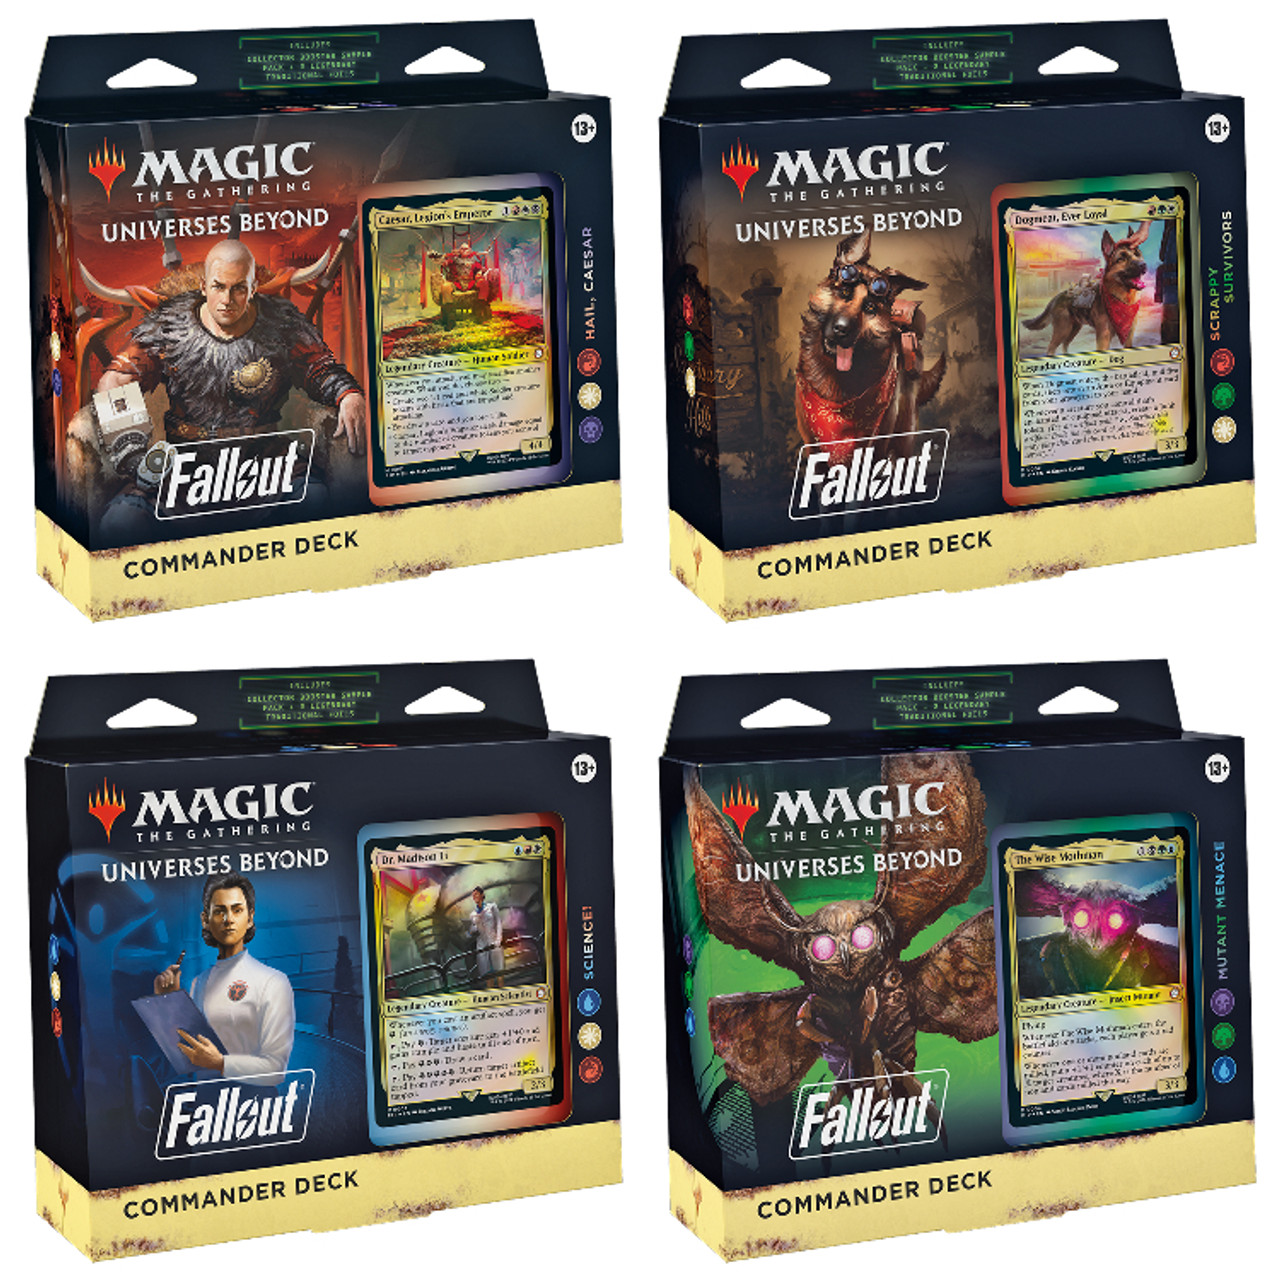 Magic: The Gathering x Fallout Commander Deck Preorders Are Now Live At   - GameSpot